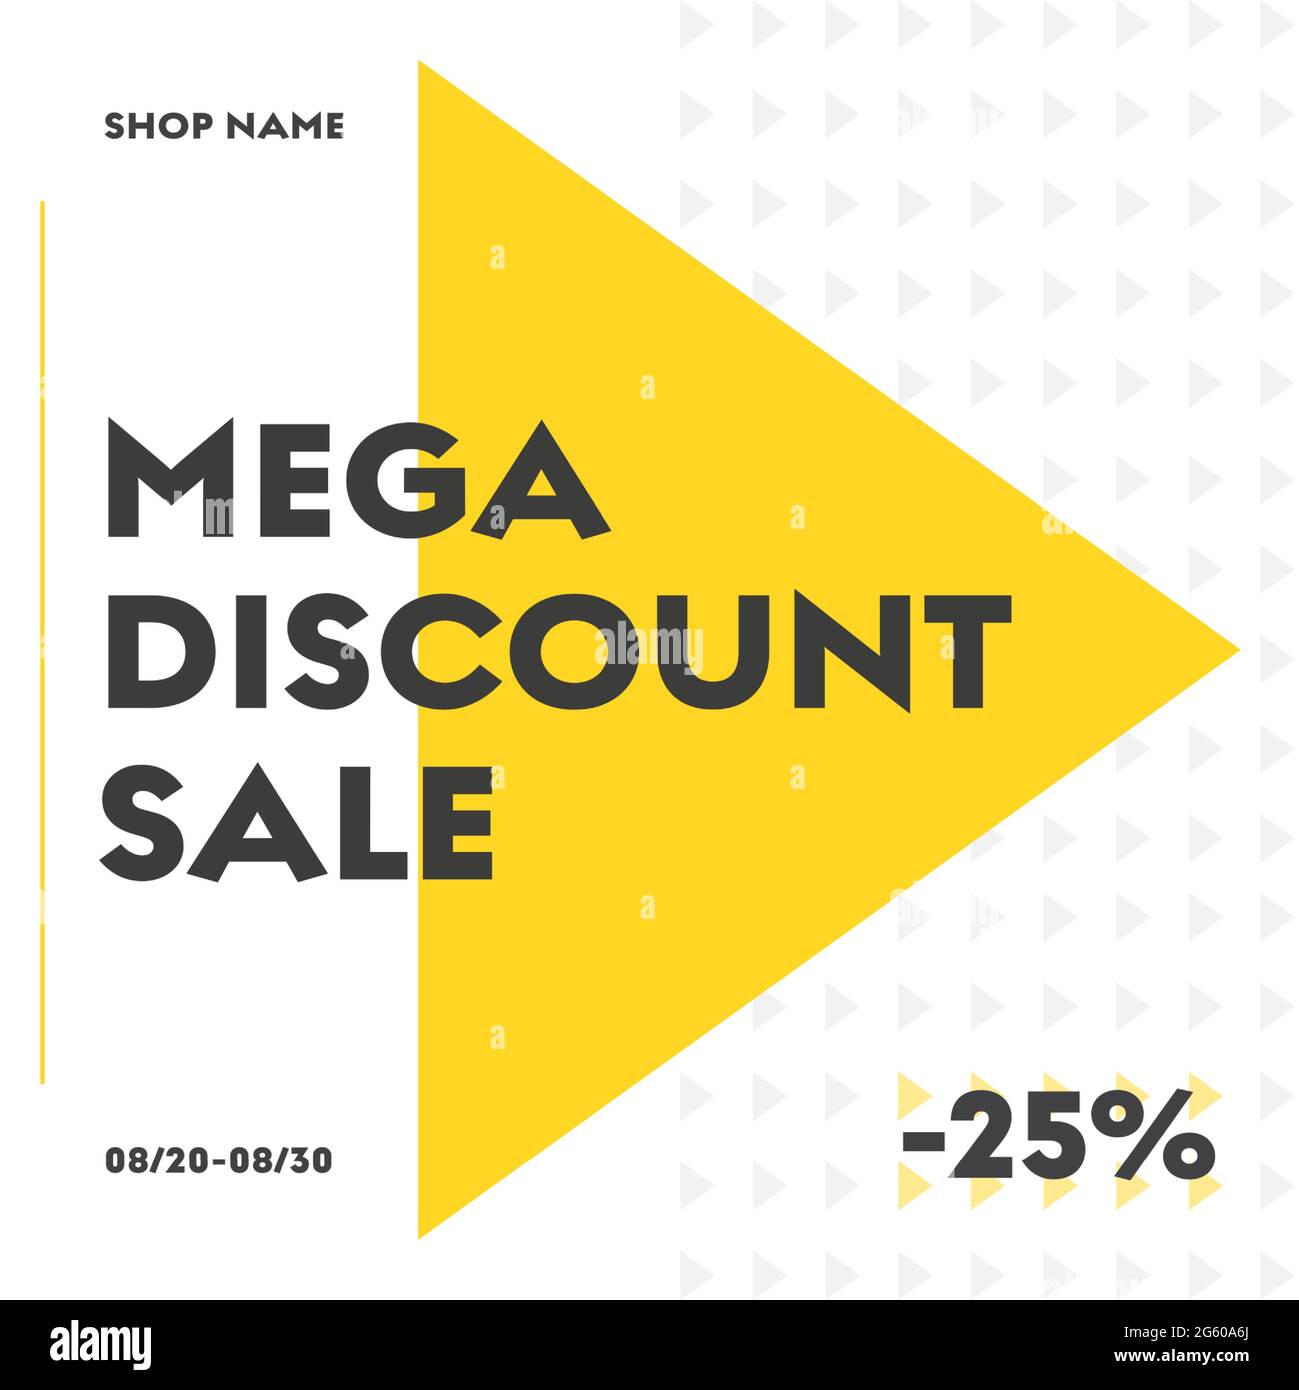 Set of vector square web banners for big sale with round yellow and white elements. Templates for social networks. Stock Vector